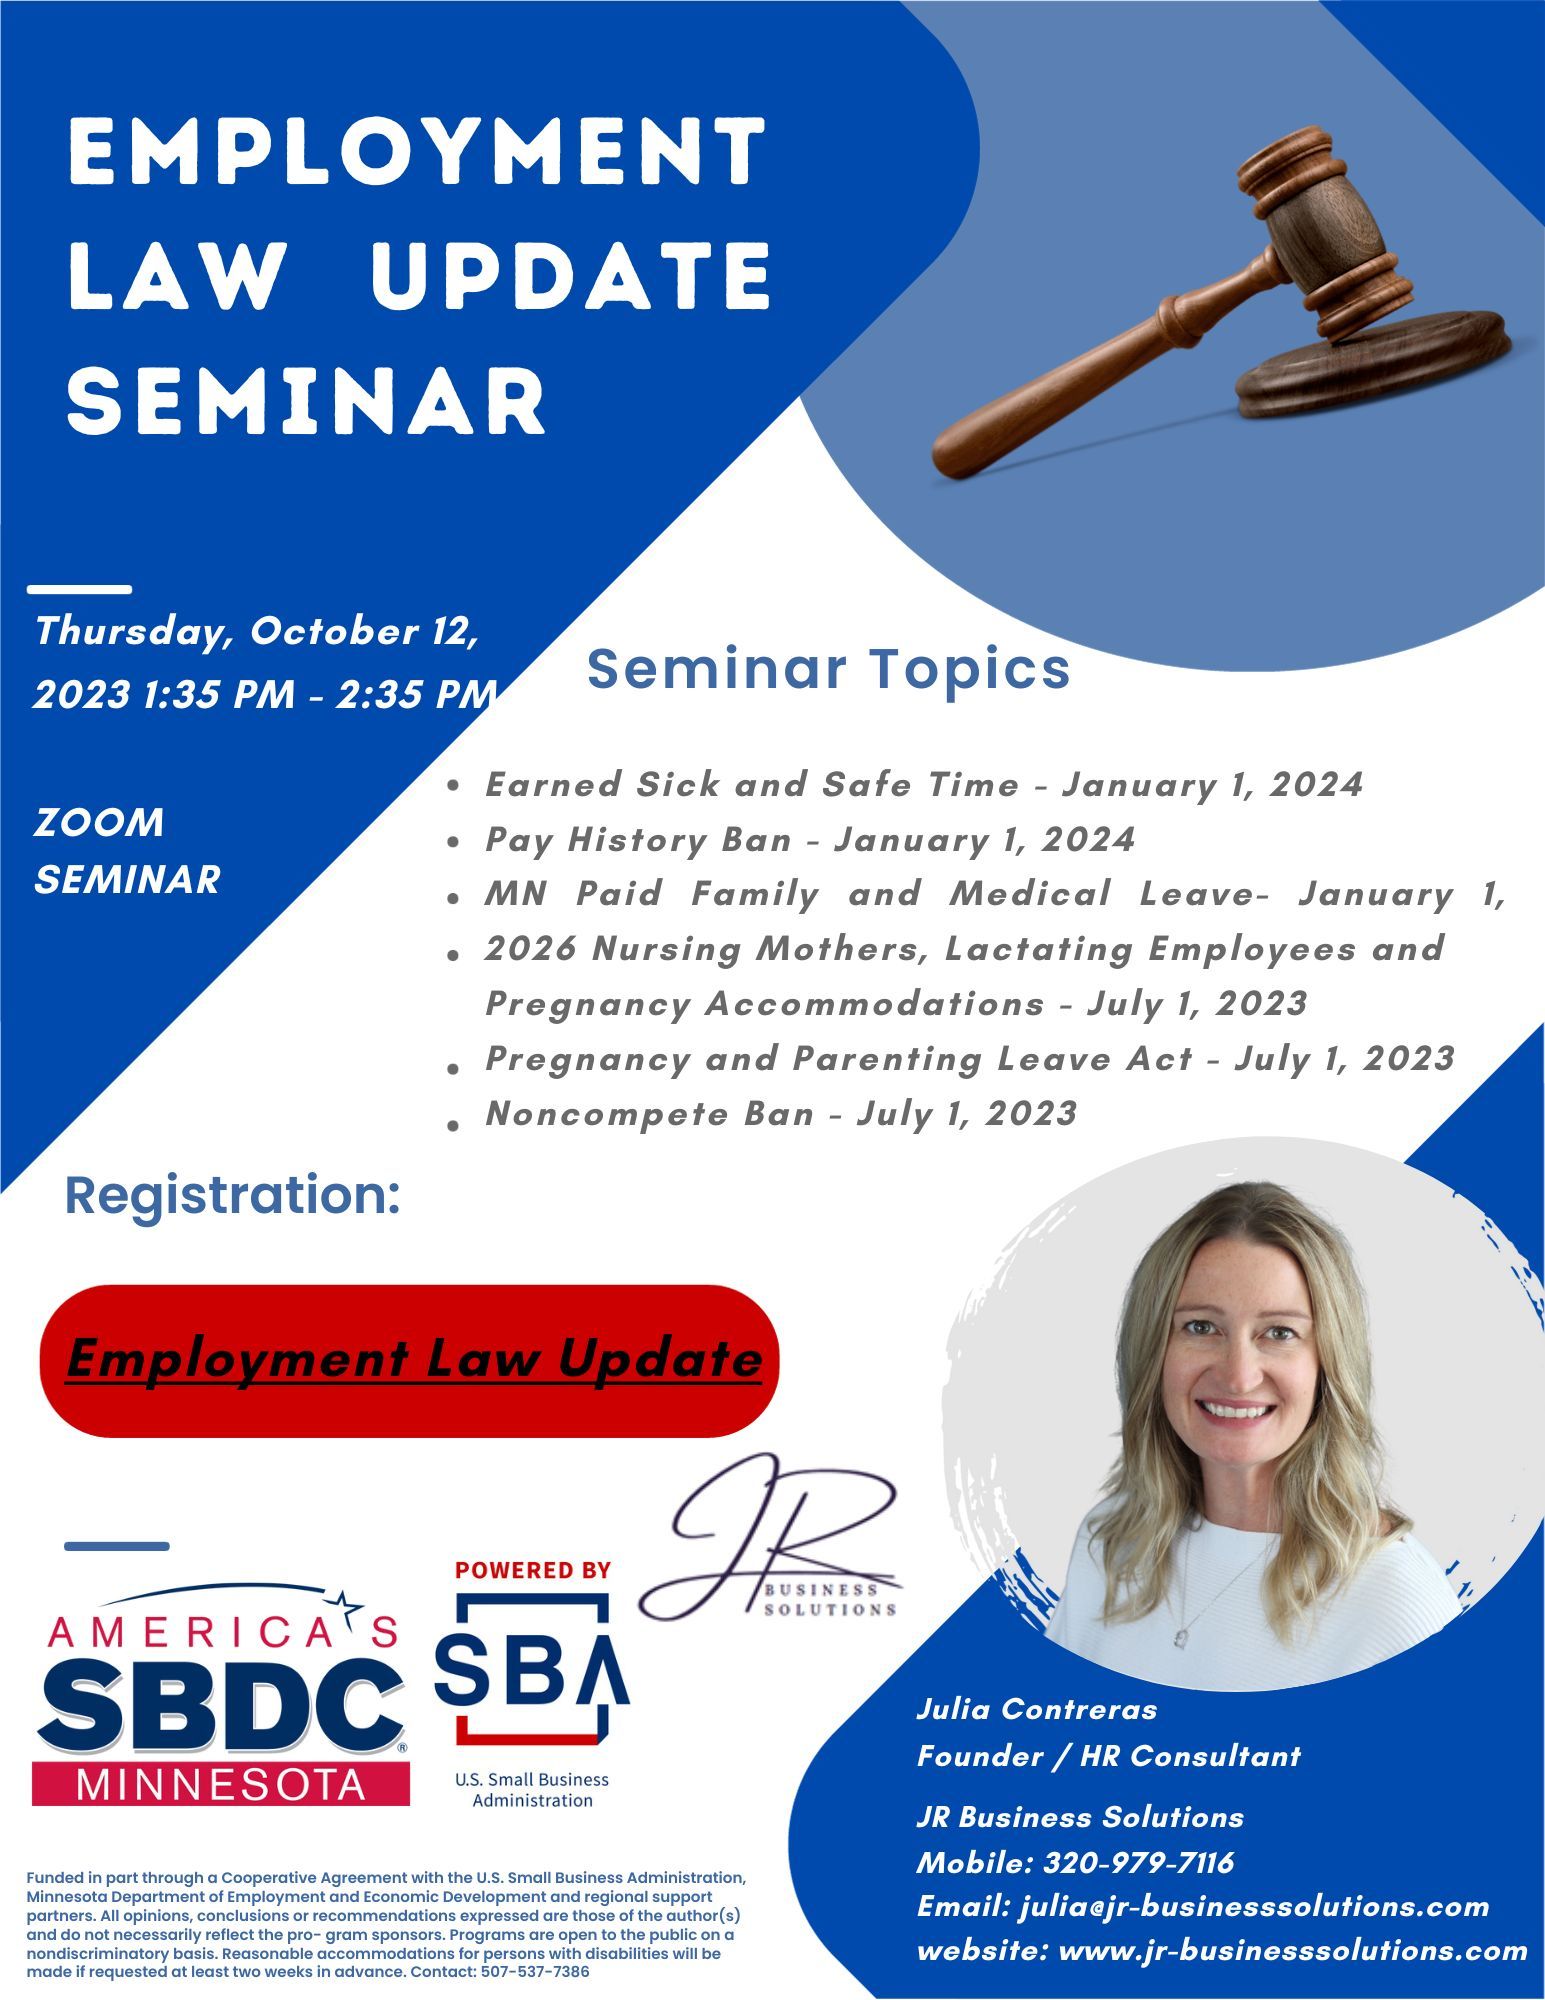 Flyer for Employment Law Update Seminar, Thursday October 12, 2023 1:35-2:35, Zoom Seminar. Seminar Topics 
-Earned Sick and Safe Time - January 1, 2024
-Pay History Ban - January 1, 2024
-MN Paid Family and Medical Leave - January 1
-Nursing Mothers, Lactating Employees and Pregnancy Accommodations - July 1, 2023
-Pregnancy and Parenting Leave Act - July 1, 2023
-Noncompete Ban - July 1, 2023
Registration link, America's SBCD Minnesota Logo, Powered by SBA U.S. Small Business Administration Logo, Julia R Business Solutions Logo
Photo of Julia Contreras  
Julia Contreras,Founder/HR Consultant
JR Business Solutions
Mobile: 320-979-7116
Email: julia@jr-businesssolutions.com
website: www.jr-businesssolutions.com